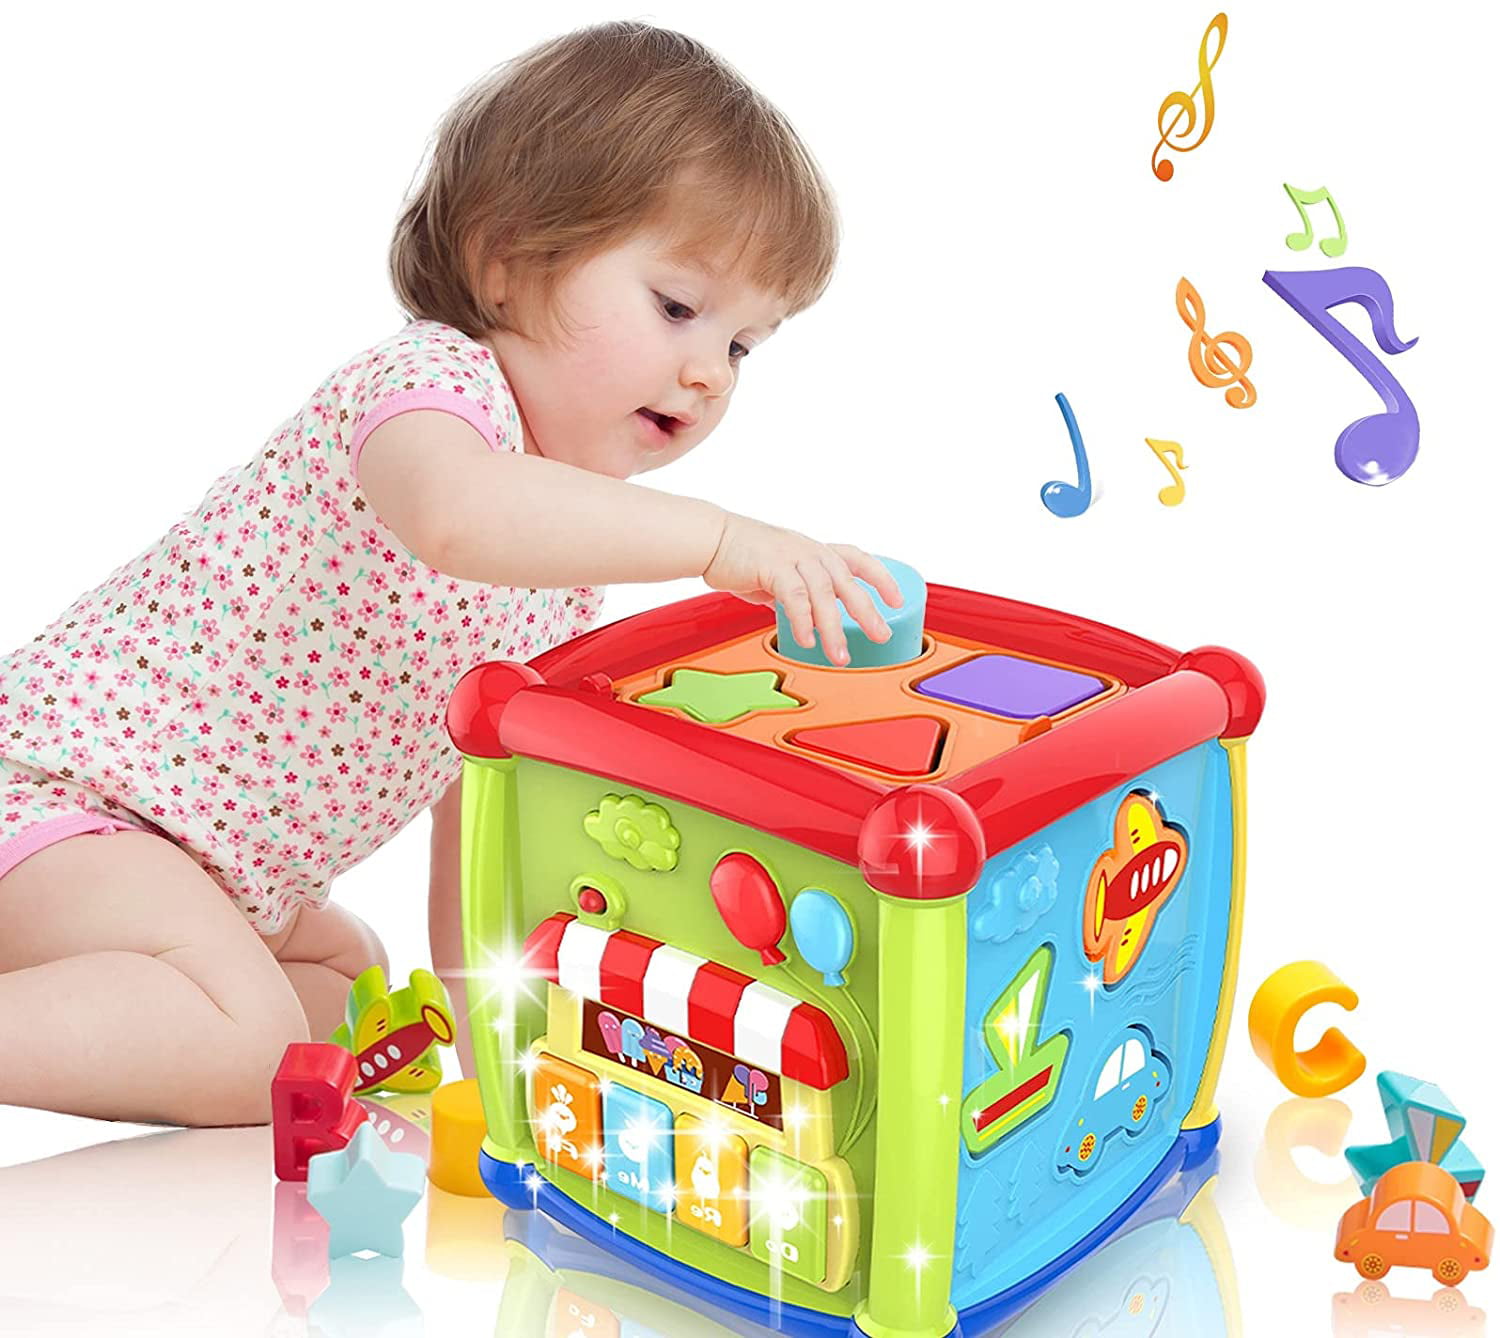 TUMAMA Baby Musical Electronic Toy with Night Lamps Activity Play Centers,Teaching Clock,Sorting Stacking Toys Gifts for Babies,Infant,Toddlers,Boys,Girls 6 9 12 Months and up 